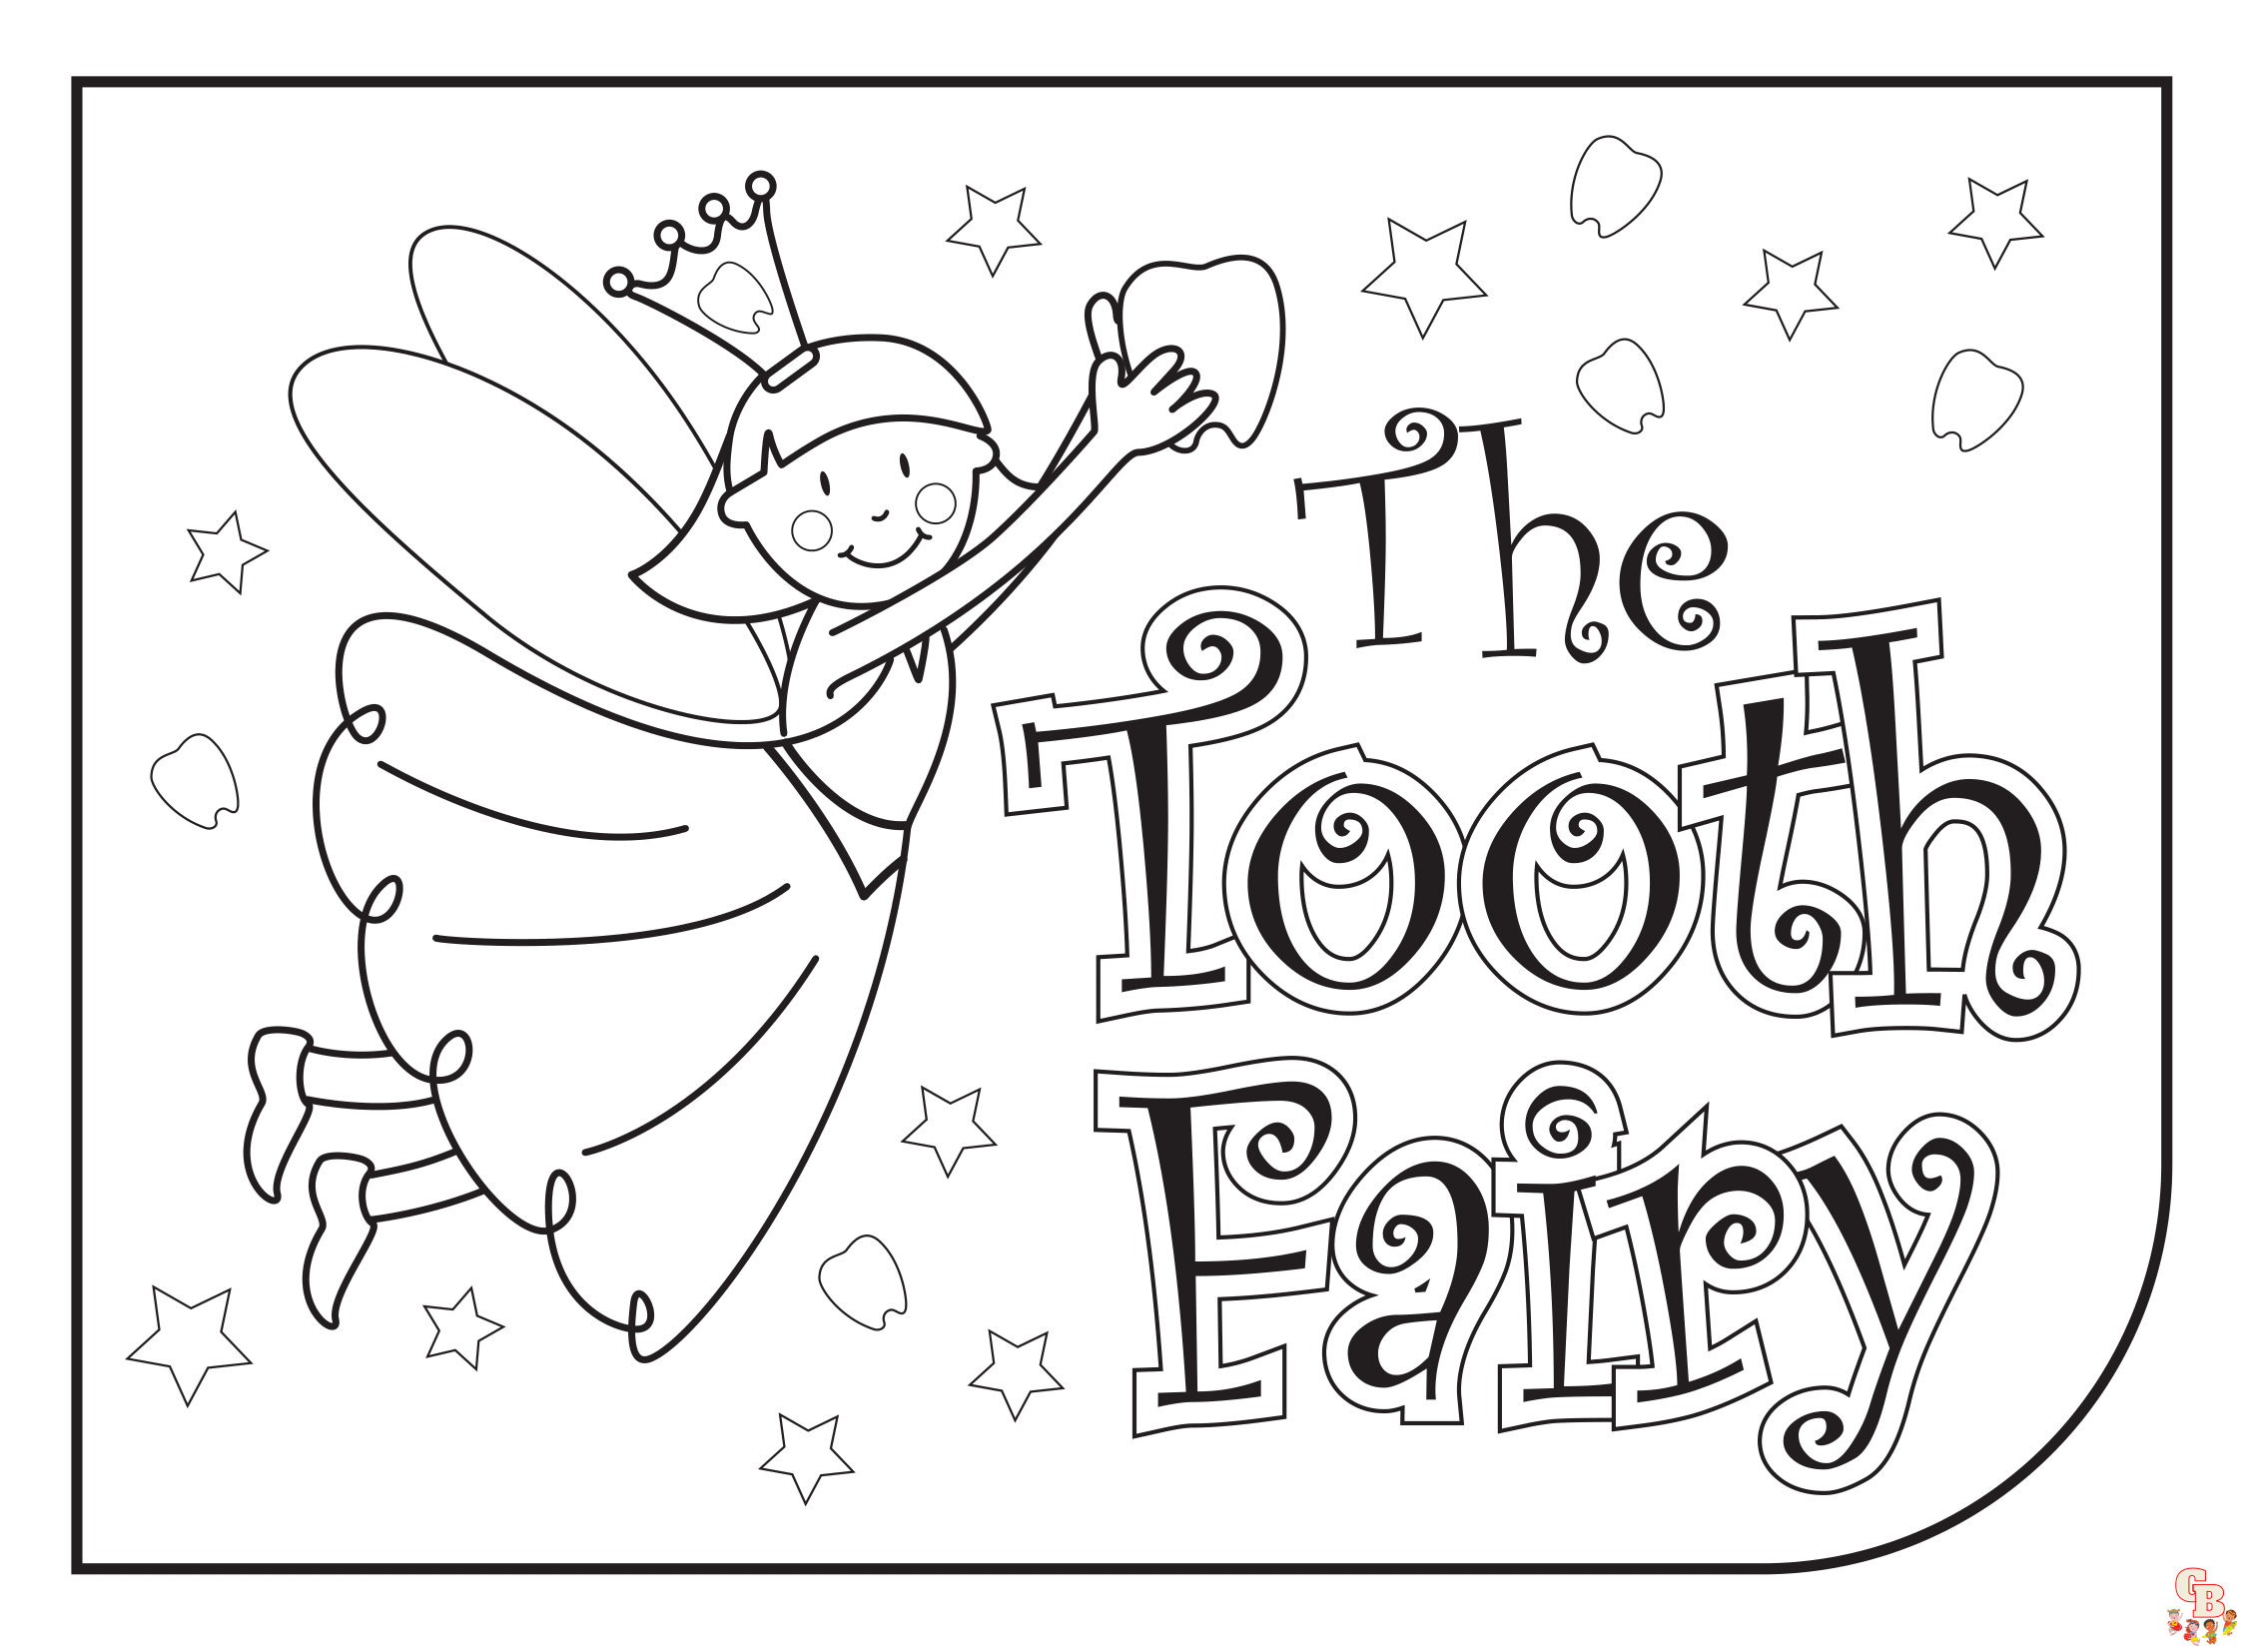 Tooth fairy coloring pages